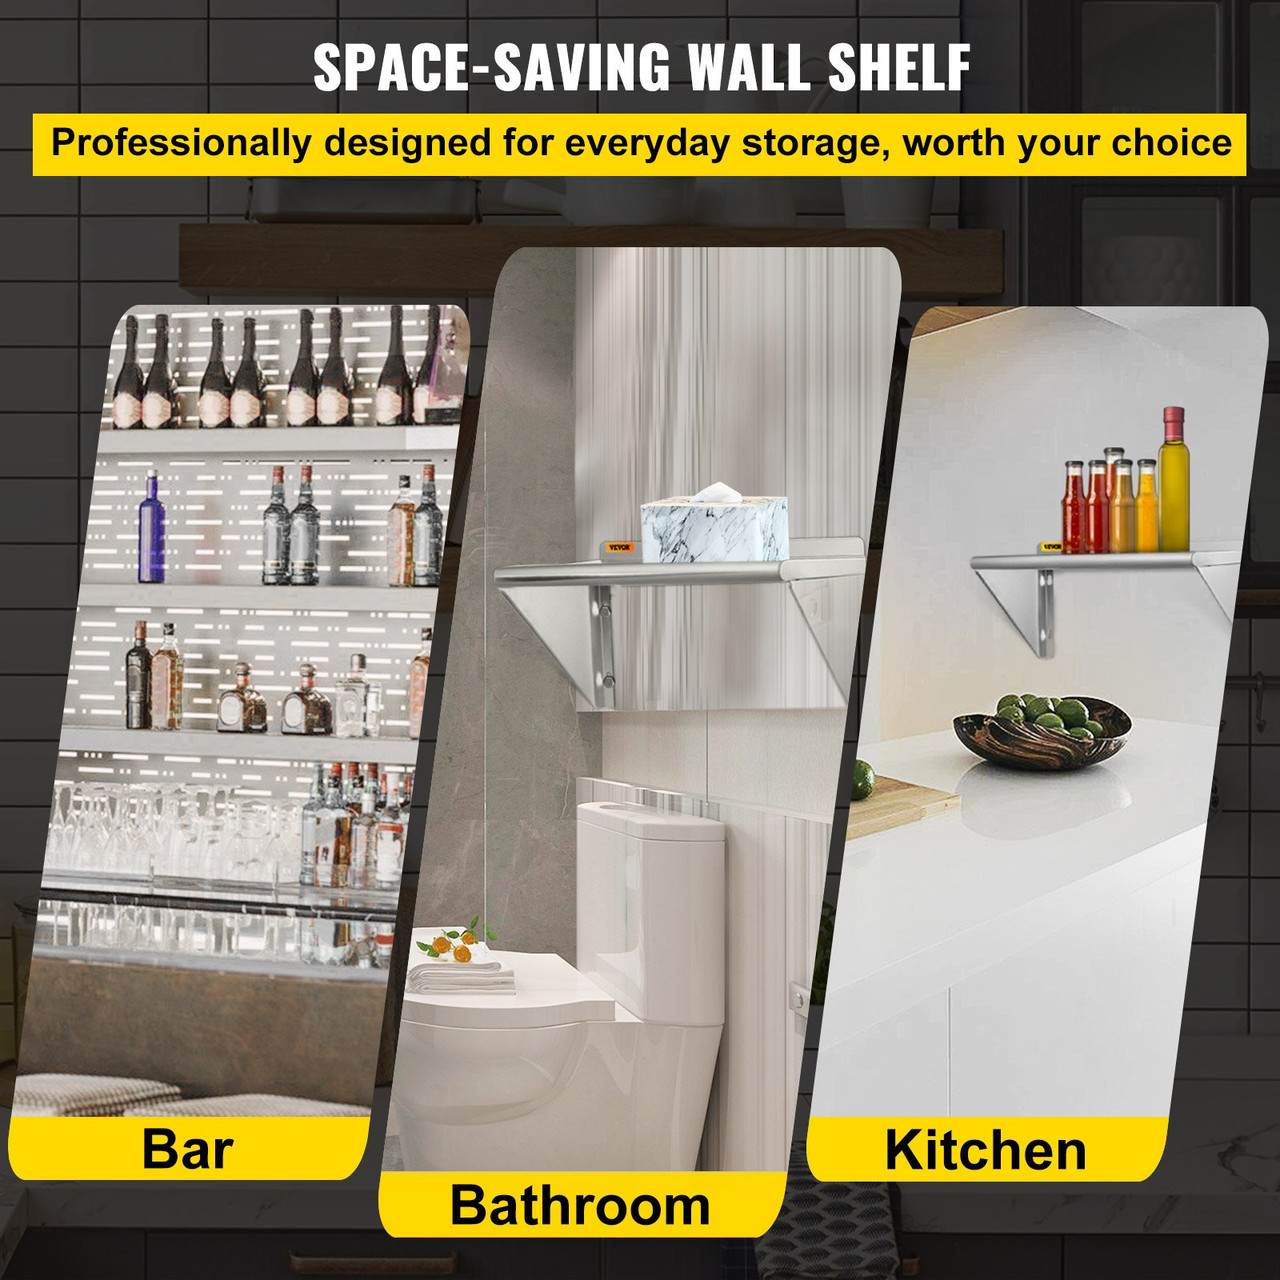 Stainless Steel Wall Shelf, 12'' x 36'', 110 lbs Load Heavy Duty Commercial Wall Mount Shelving w/ Backsplash and 2 Brackets for Restaurant, Home, Kitchen, Hotel, Laundry Room, Bar